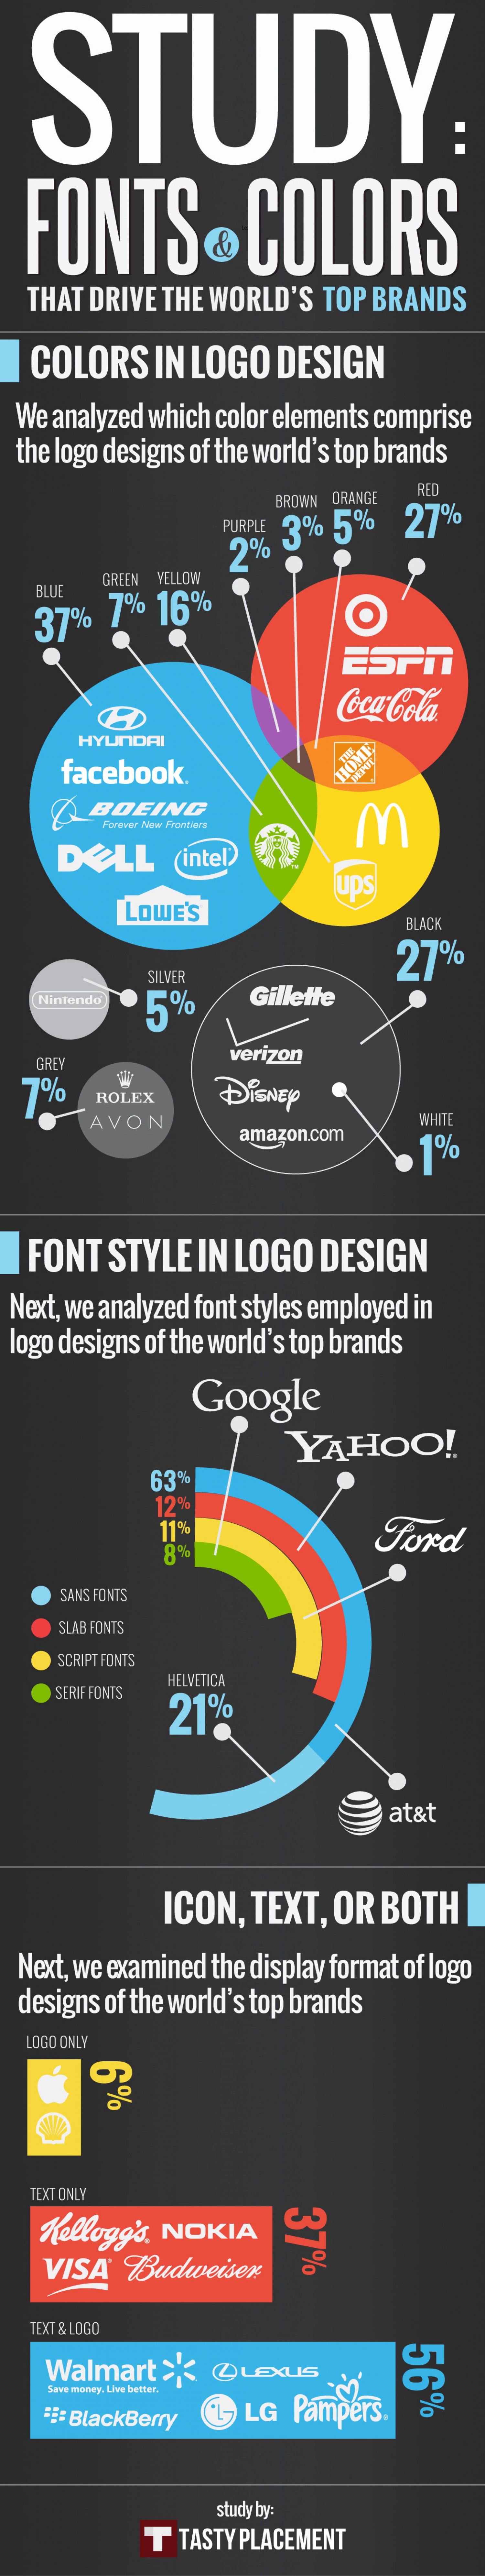 Fonts and colours for leading brands.